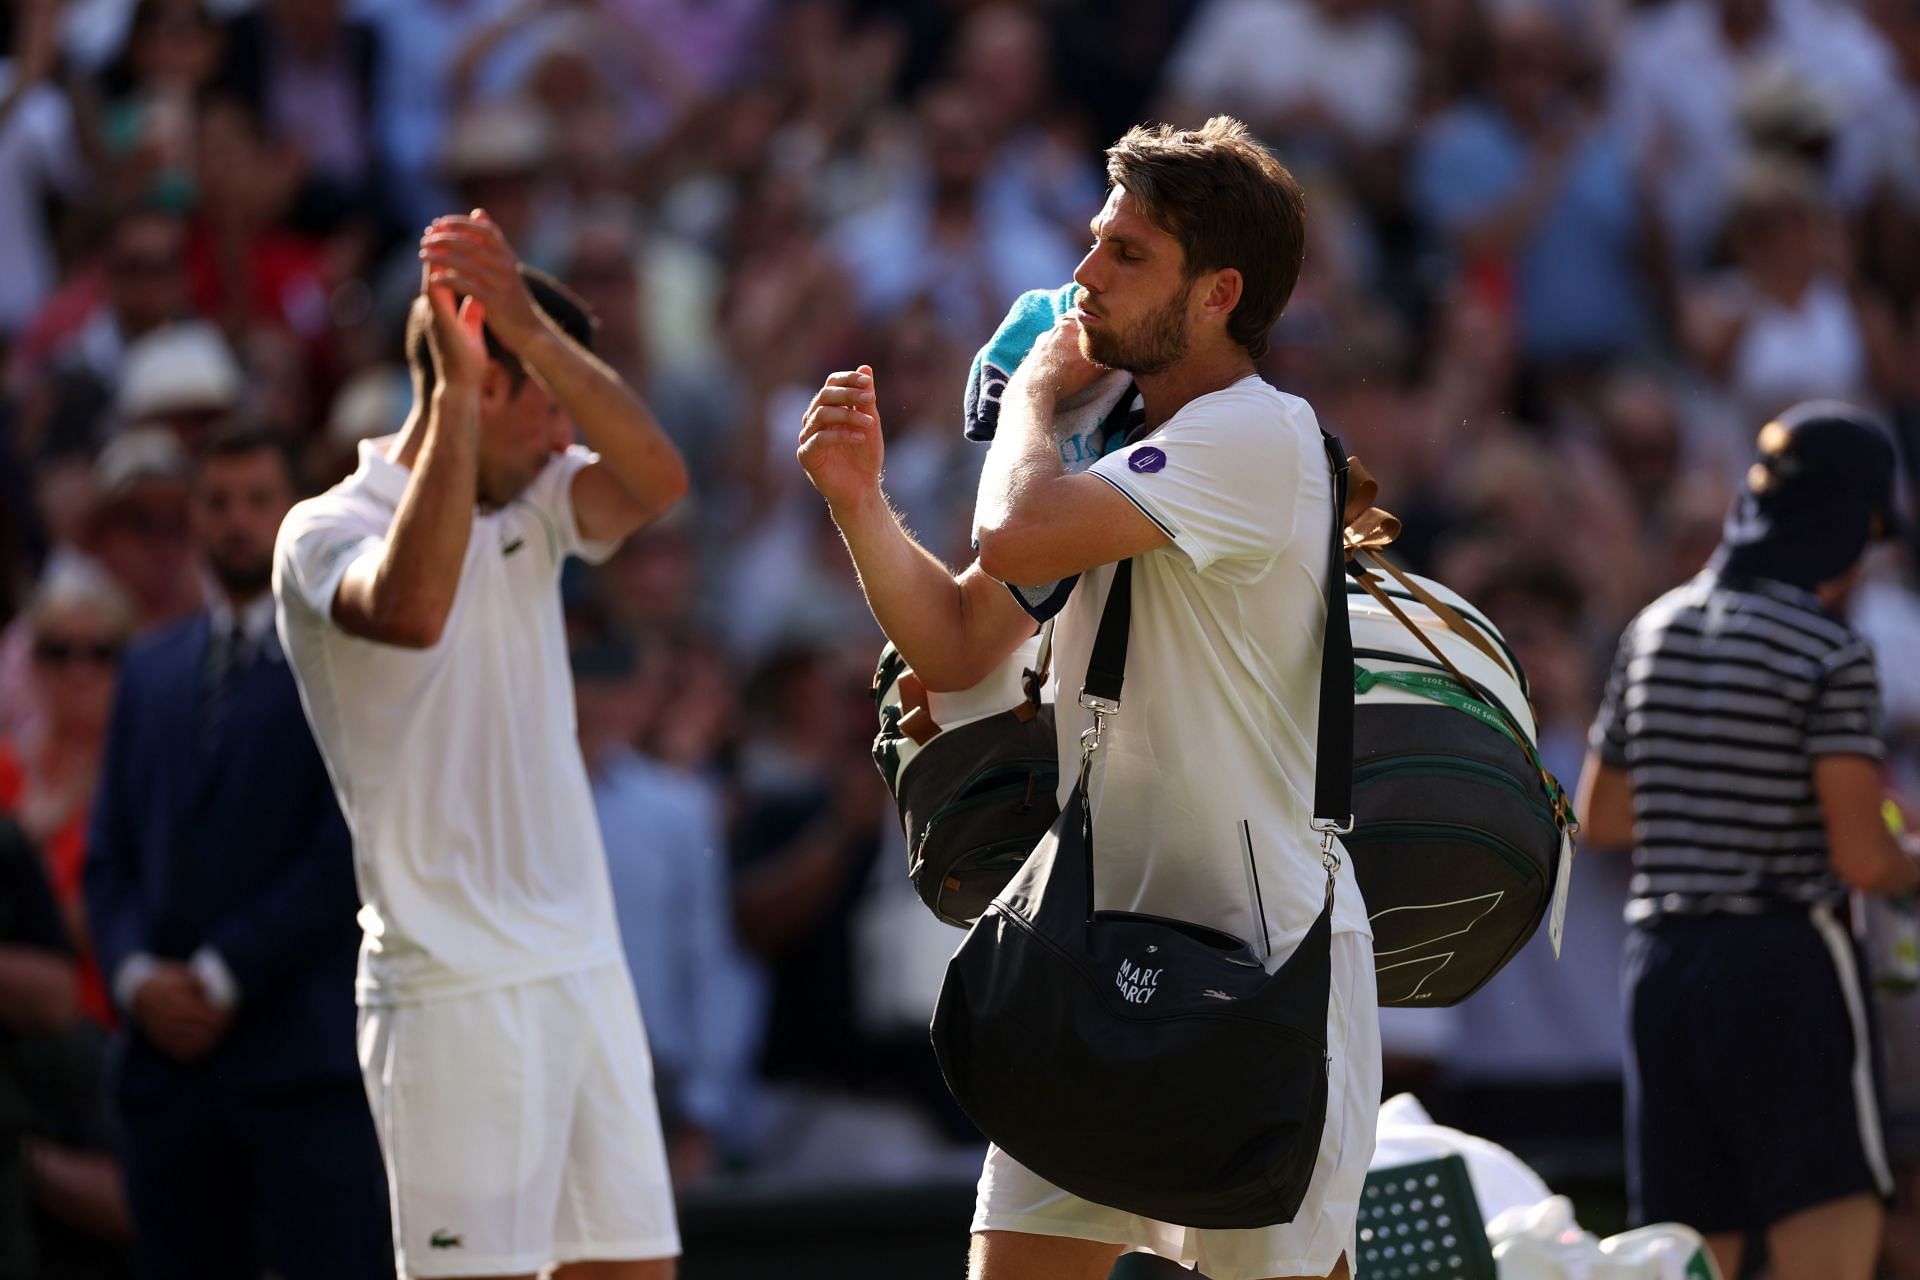 Novak Djokovic applauds as Cameron Norrie leaves the court after their semifinal clash at Wimbledon 2022